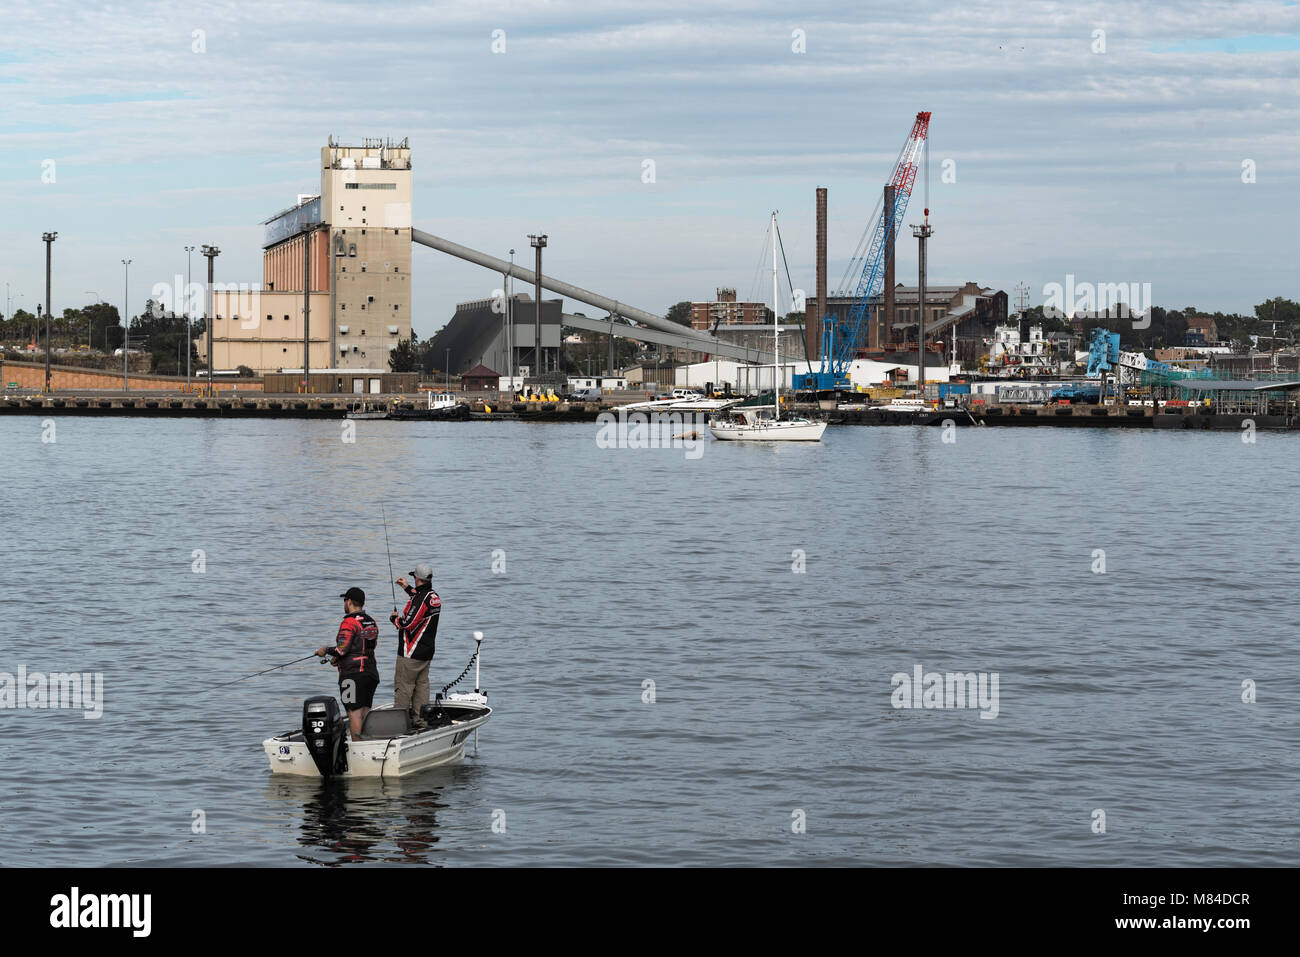 Two men fishing in a small boat (a Tinny) on Sydney harbour near White Bay. In the background is the Glebe Island silos that hold dry cement. Stock Photo